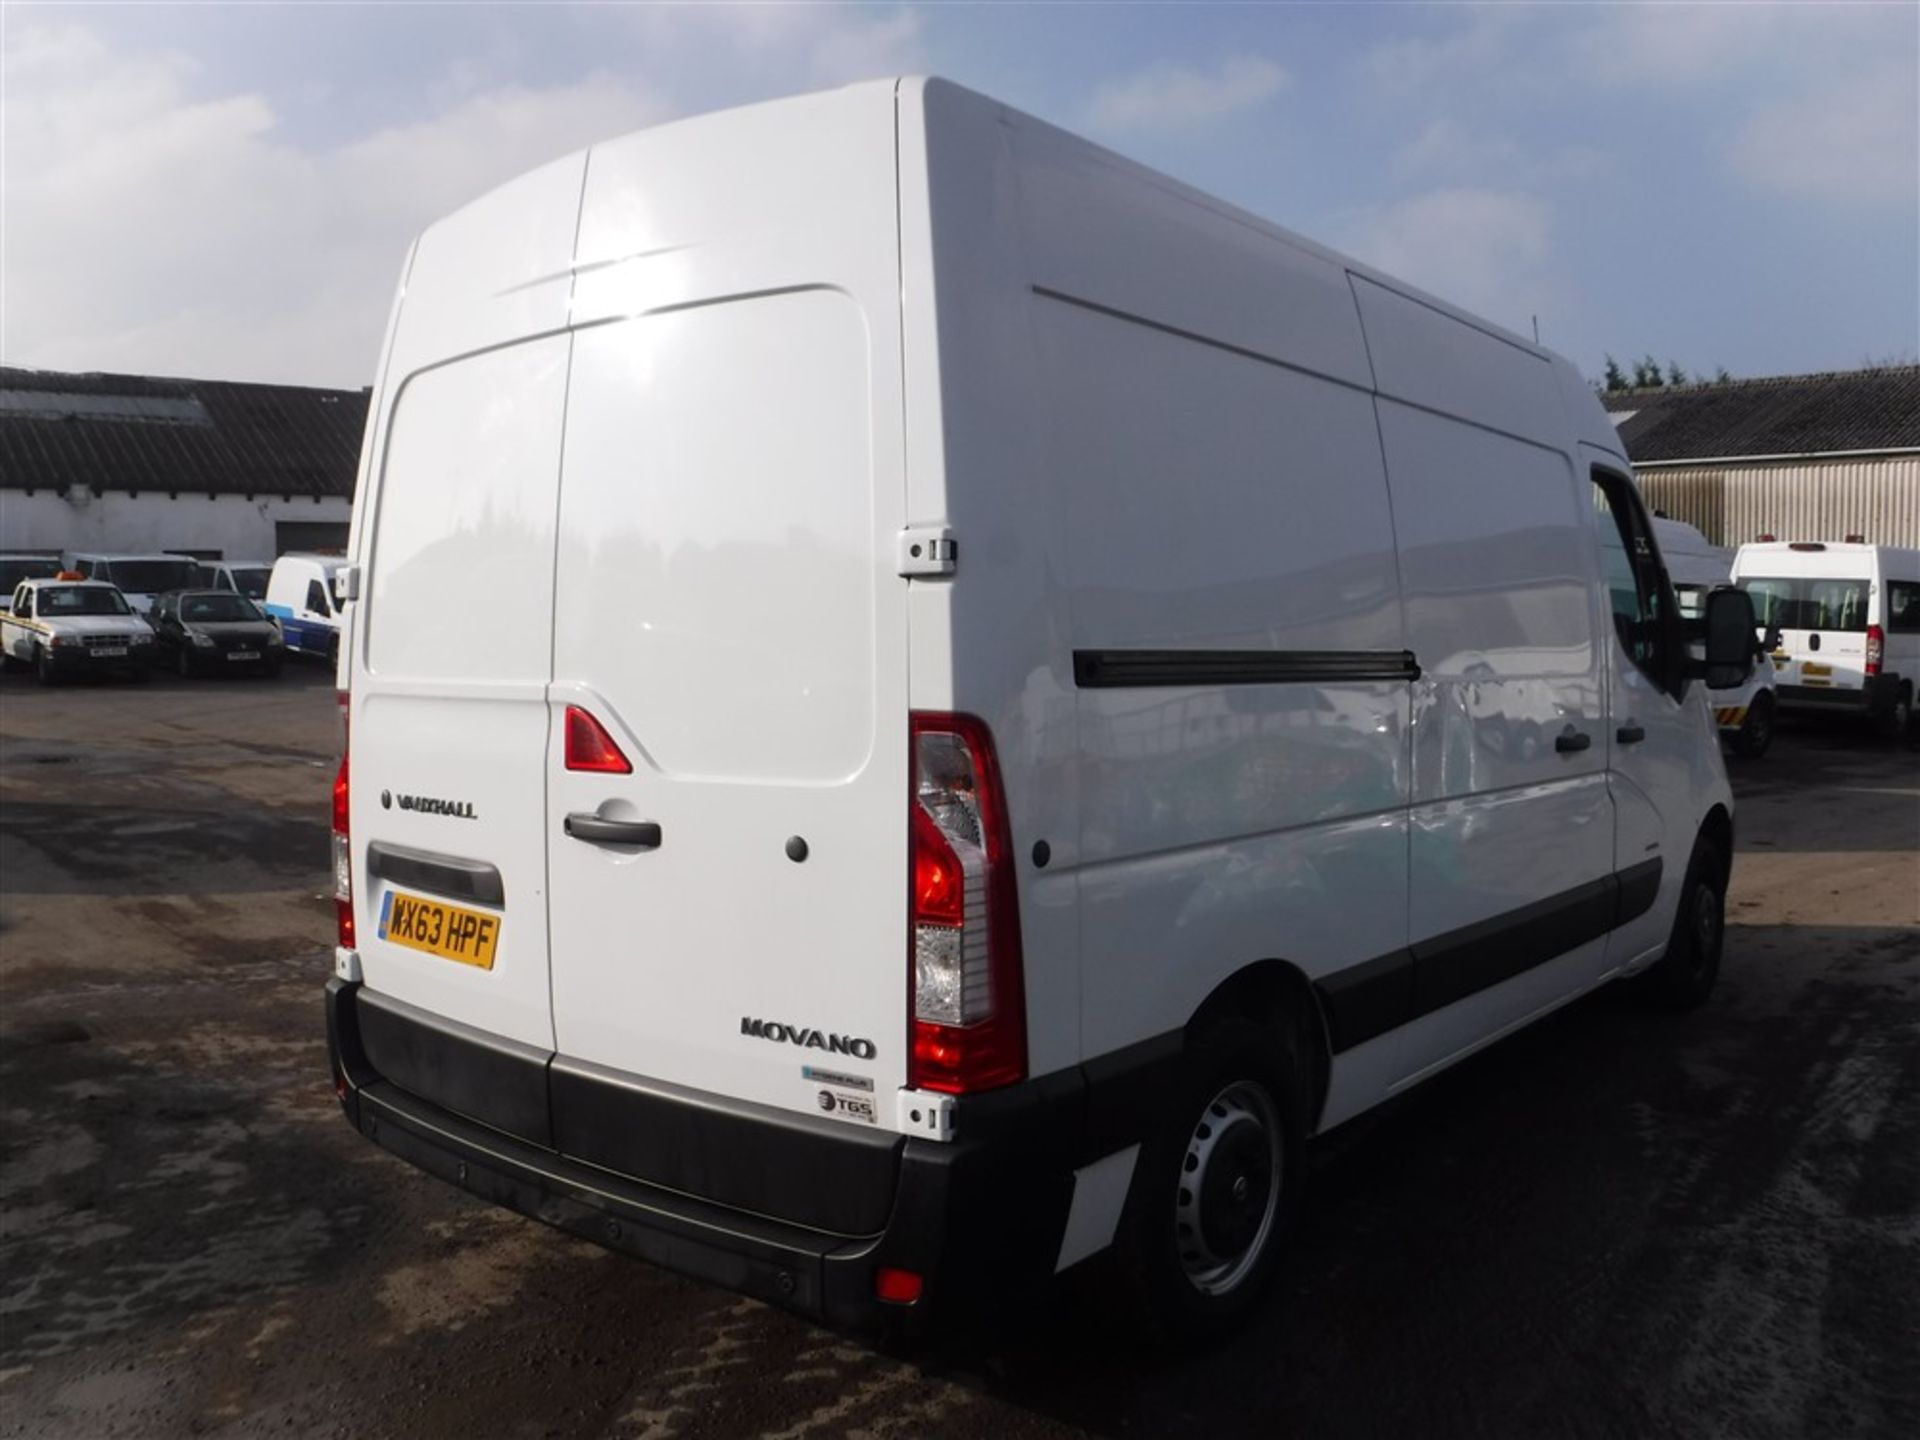 63 reg VAUXHALL MOVANO F3500 CDTI, 1ST REG 09/13, 119254M WARRANTED, V5 HERE, 1 OWNER FROM NEW, [+ - Image 4 of 5